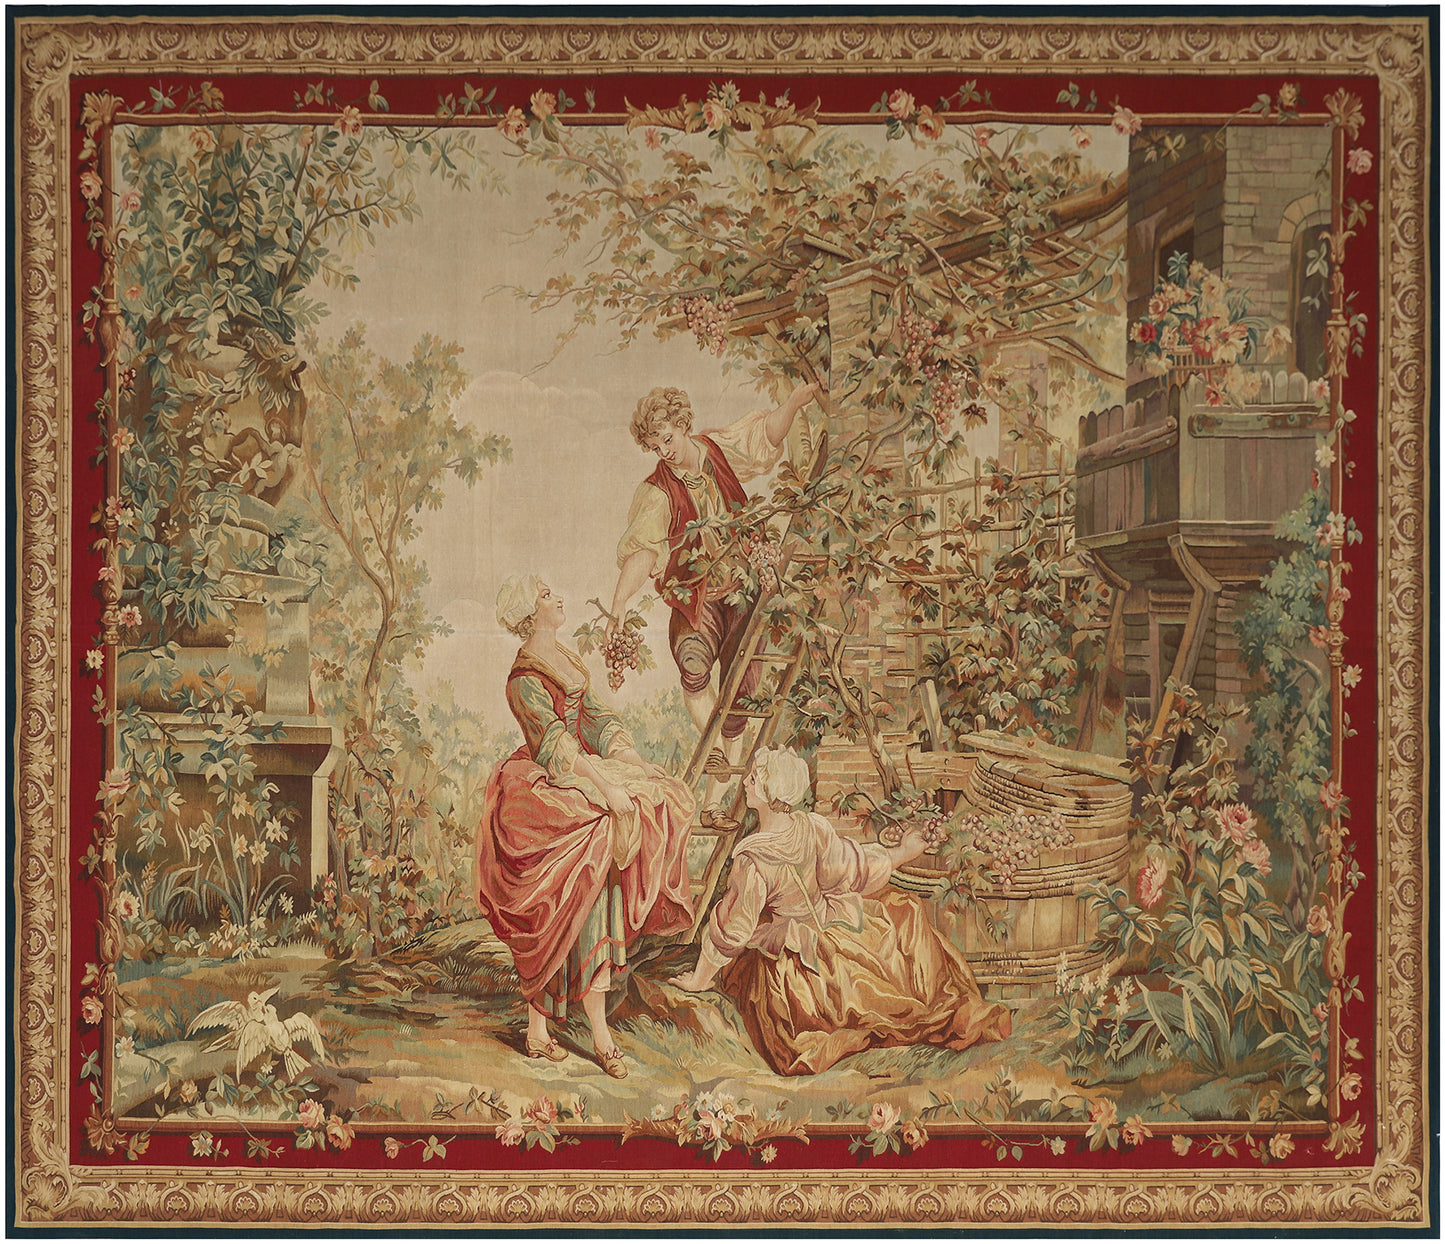 8x10 Tapestry Wall Hanging, Cherubs, Tapestry Long, Romantic Wall Art, Period Garden Scene, French Style Hand-Woven Tapestry